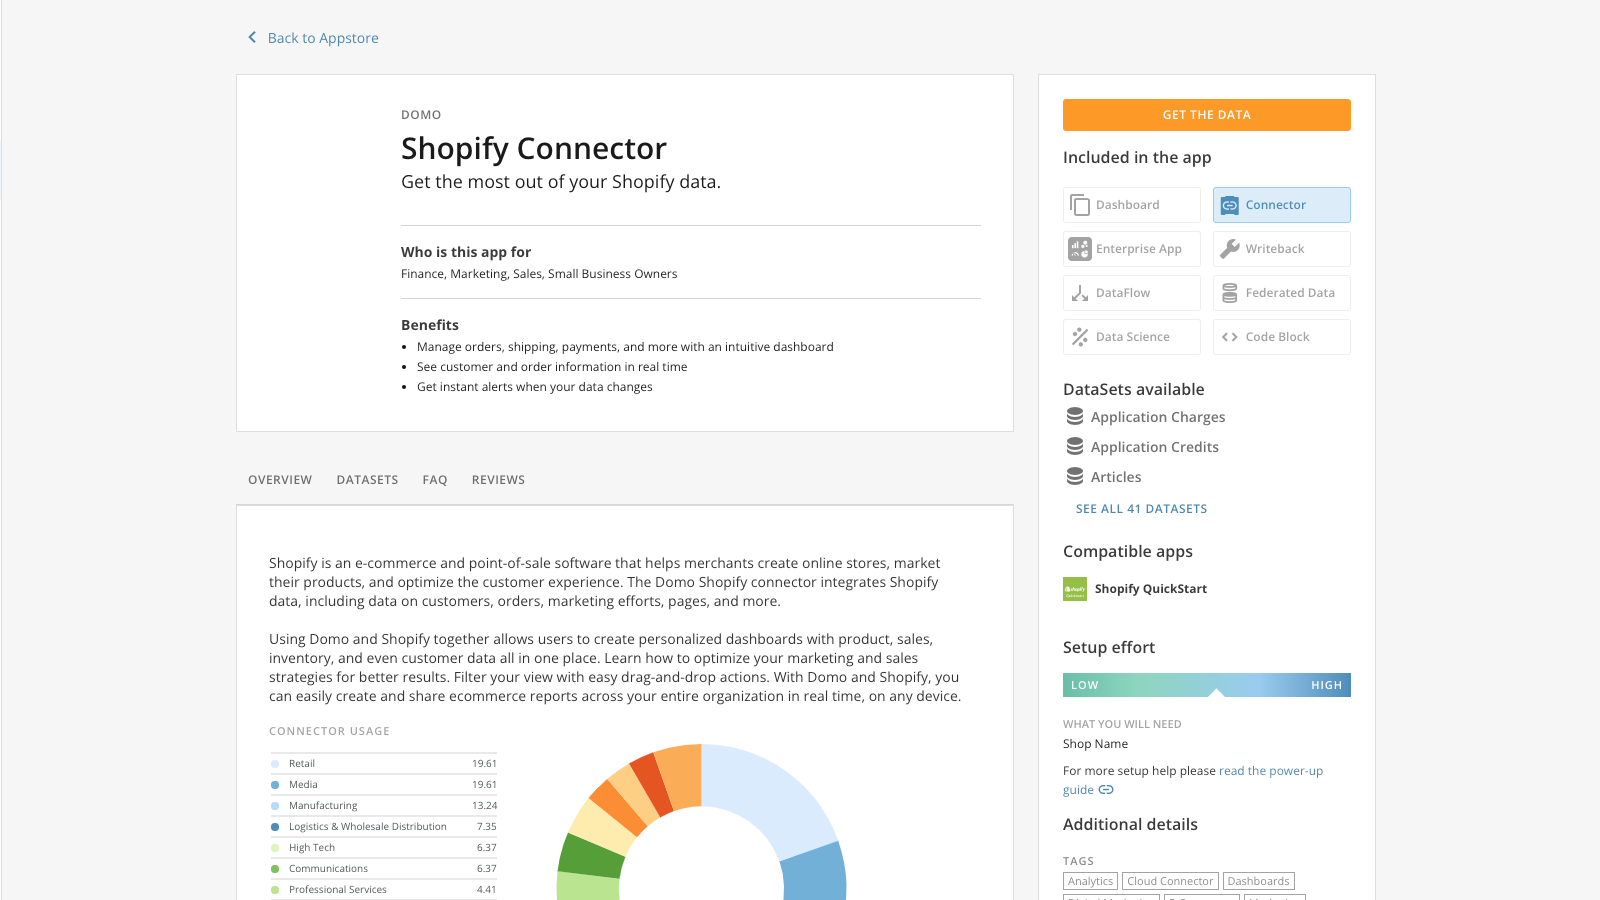 Shopify connector in Domo's Appstore.  